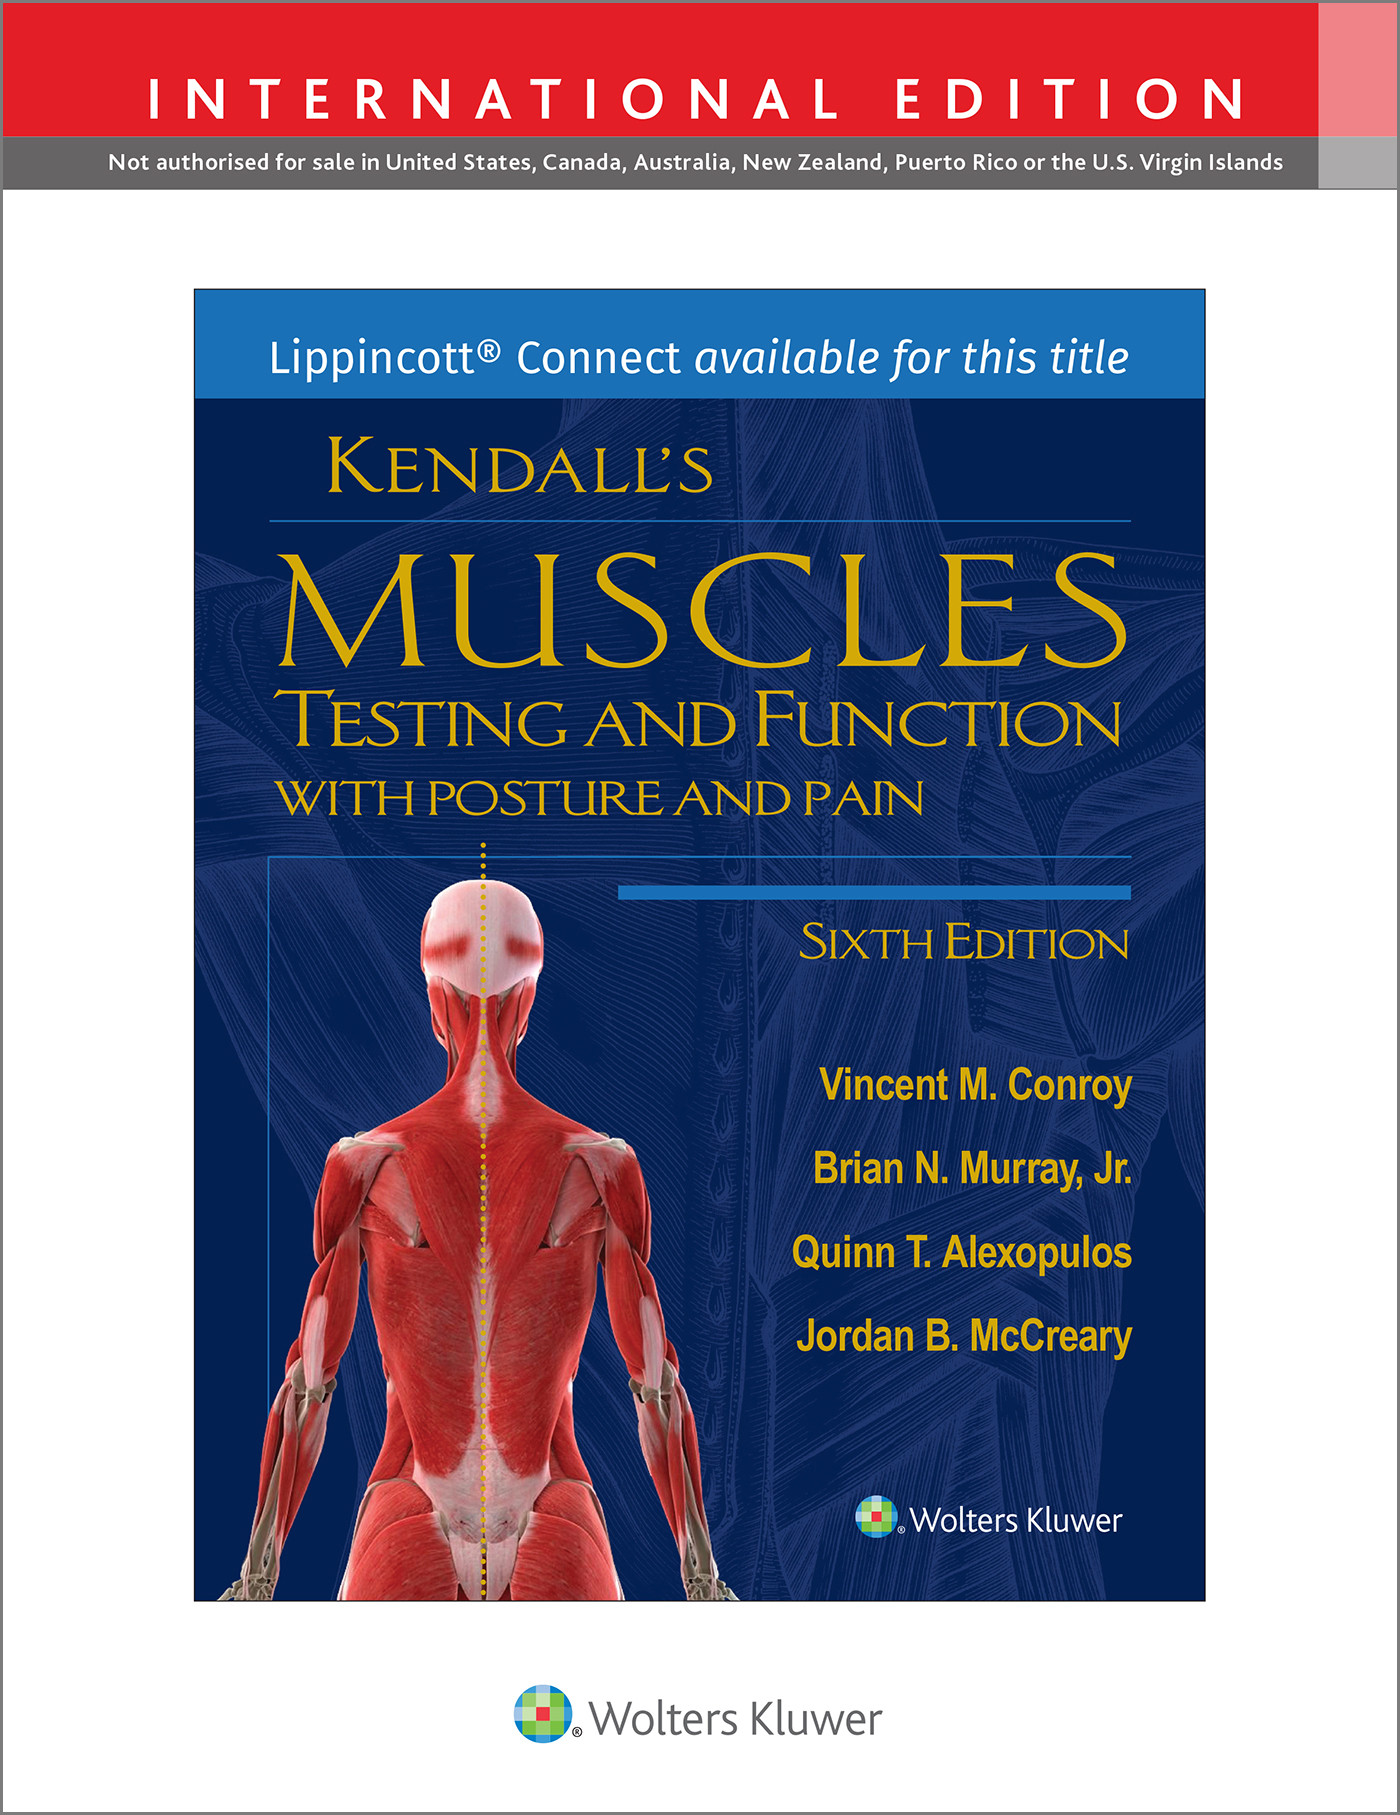 Kendall’s Muscles: Testing and Function, with Posture and Pain